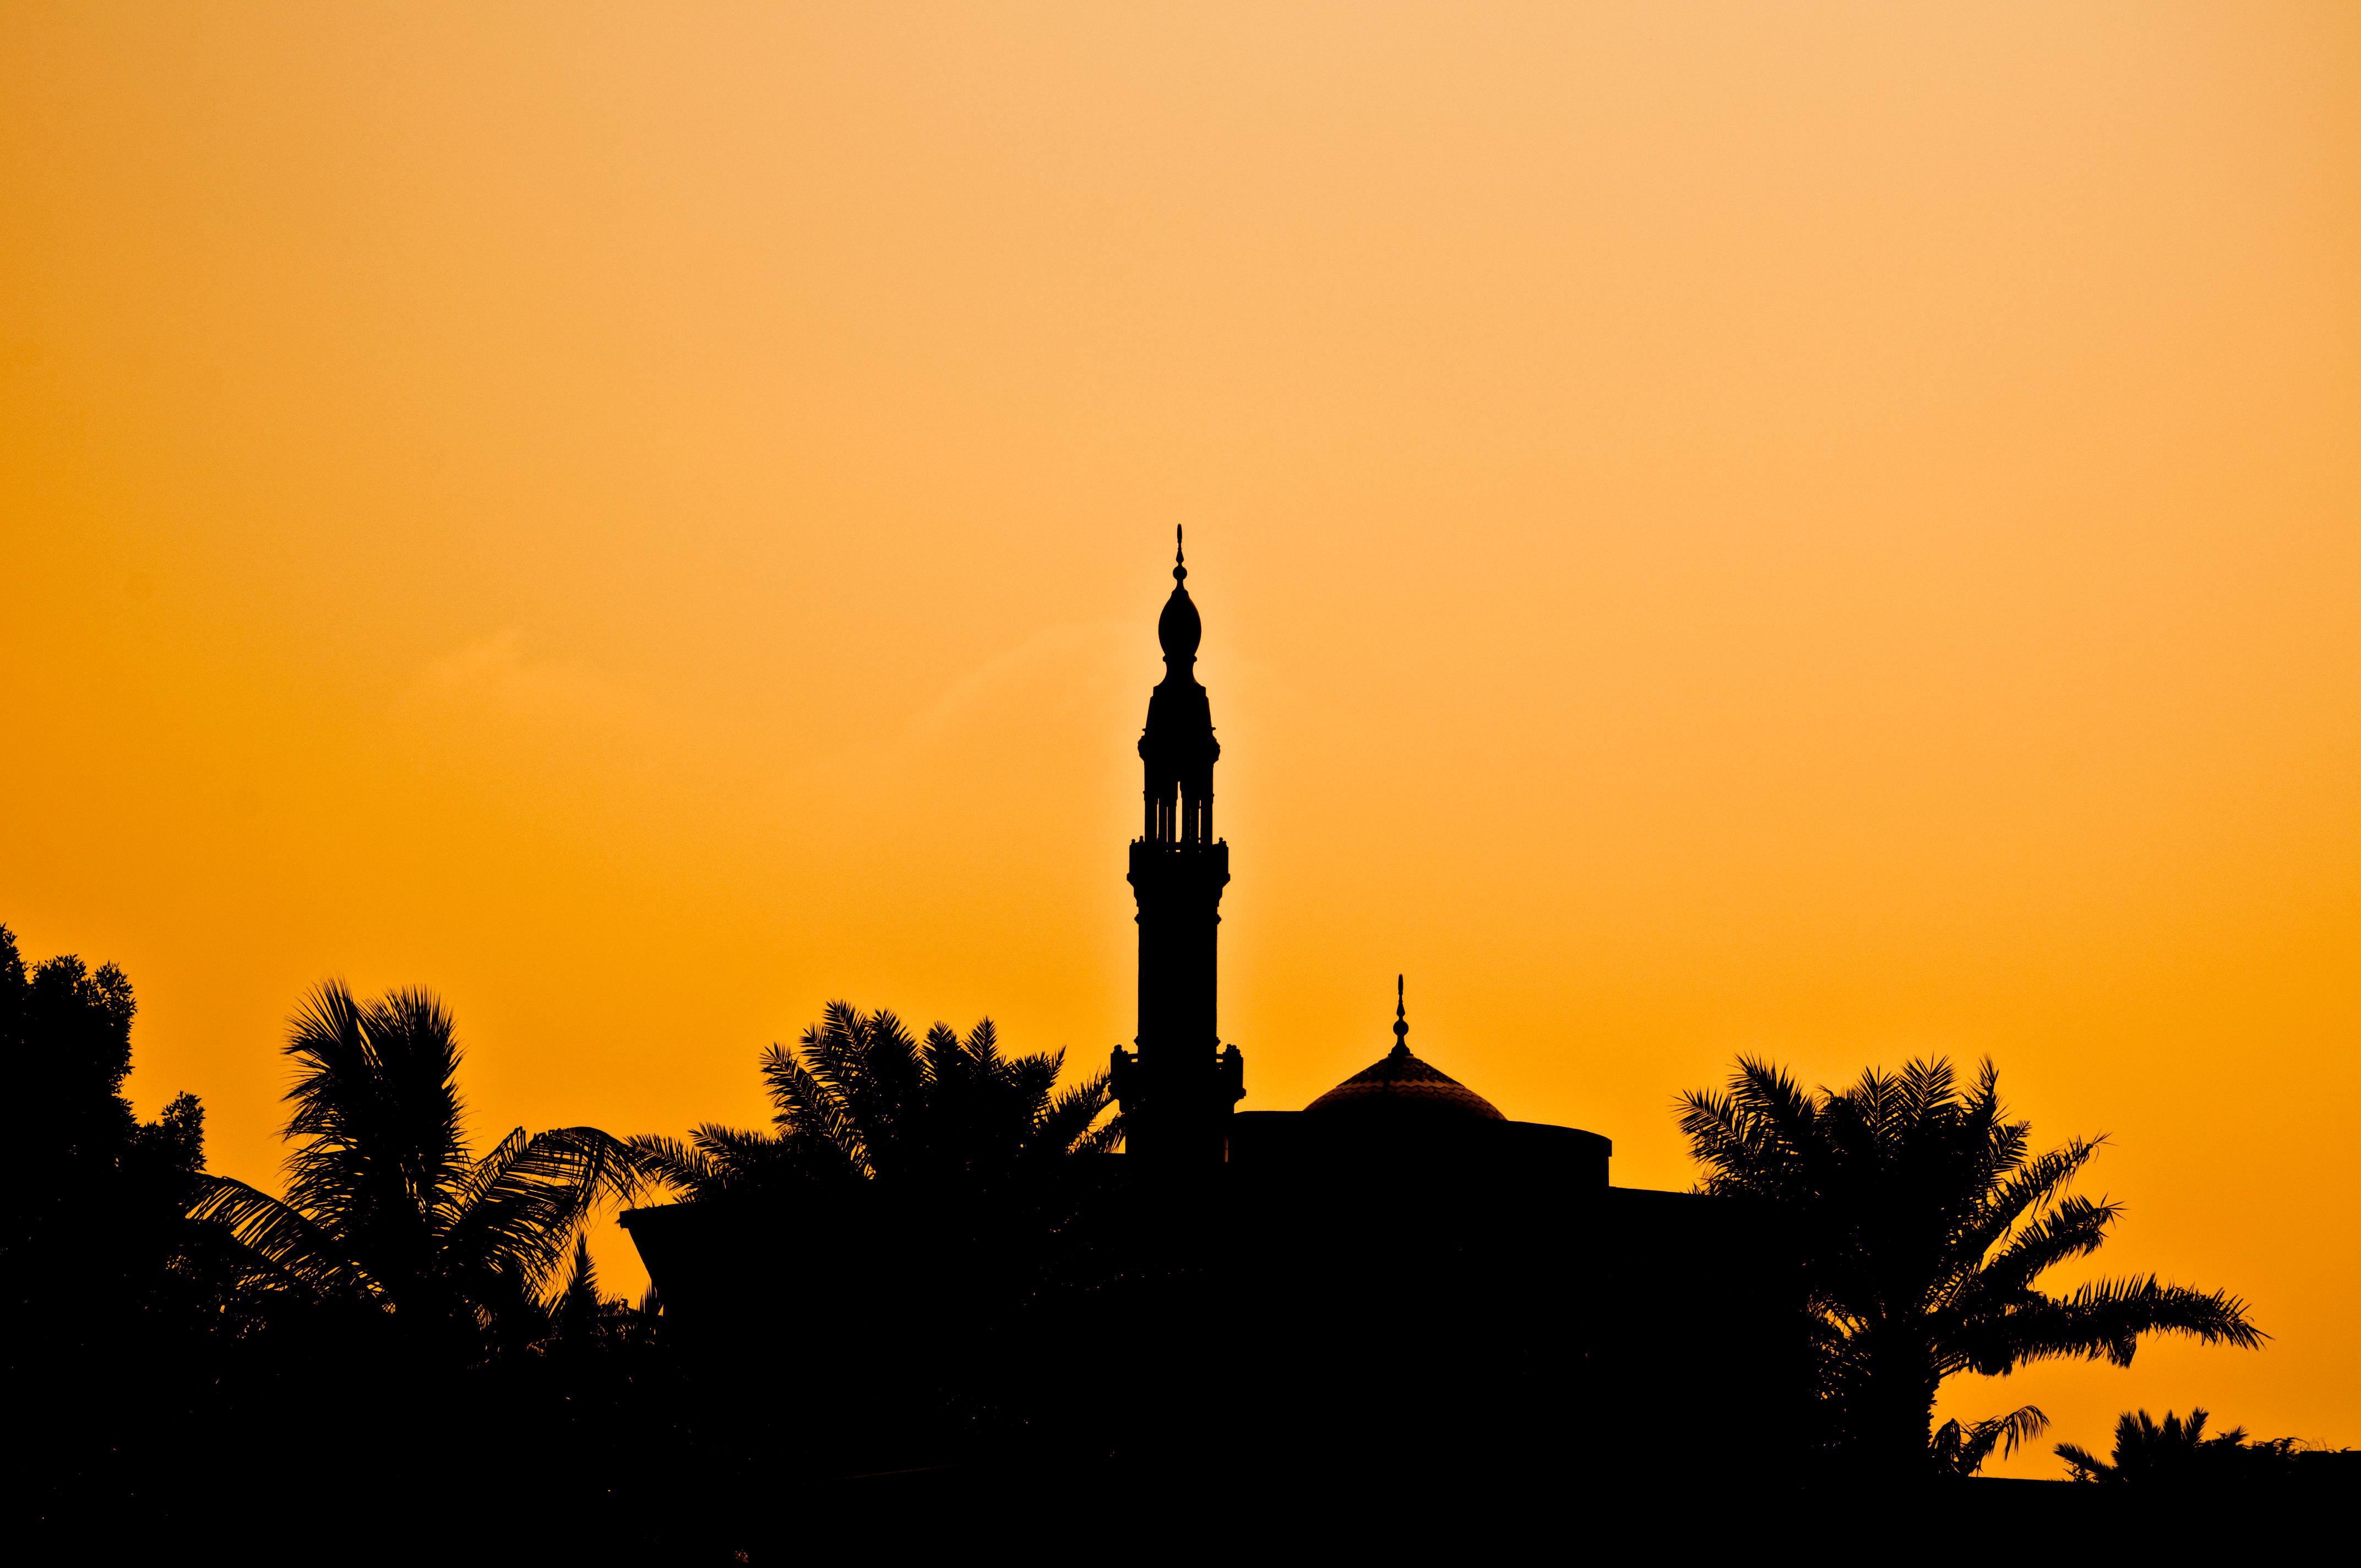 Flickr: The Mosques and Minarets Pool